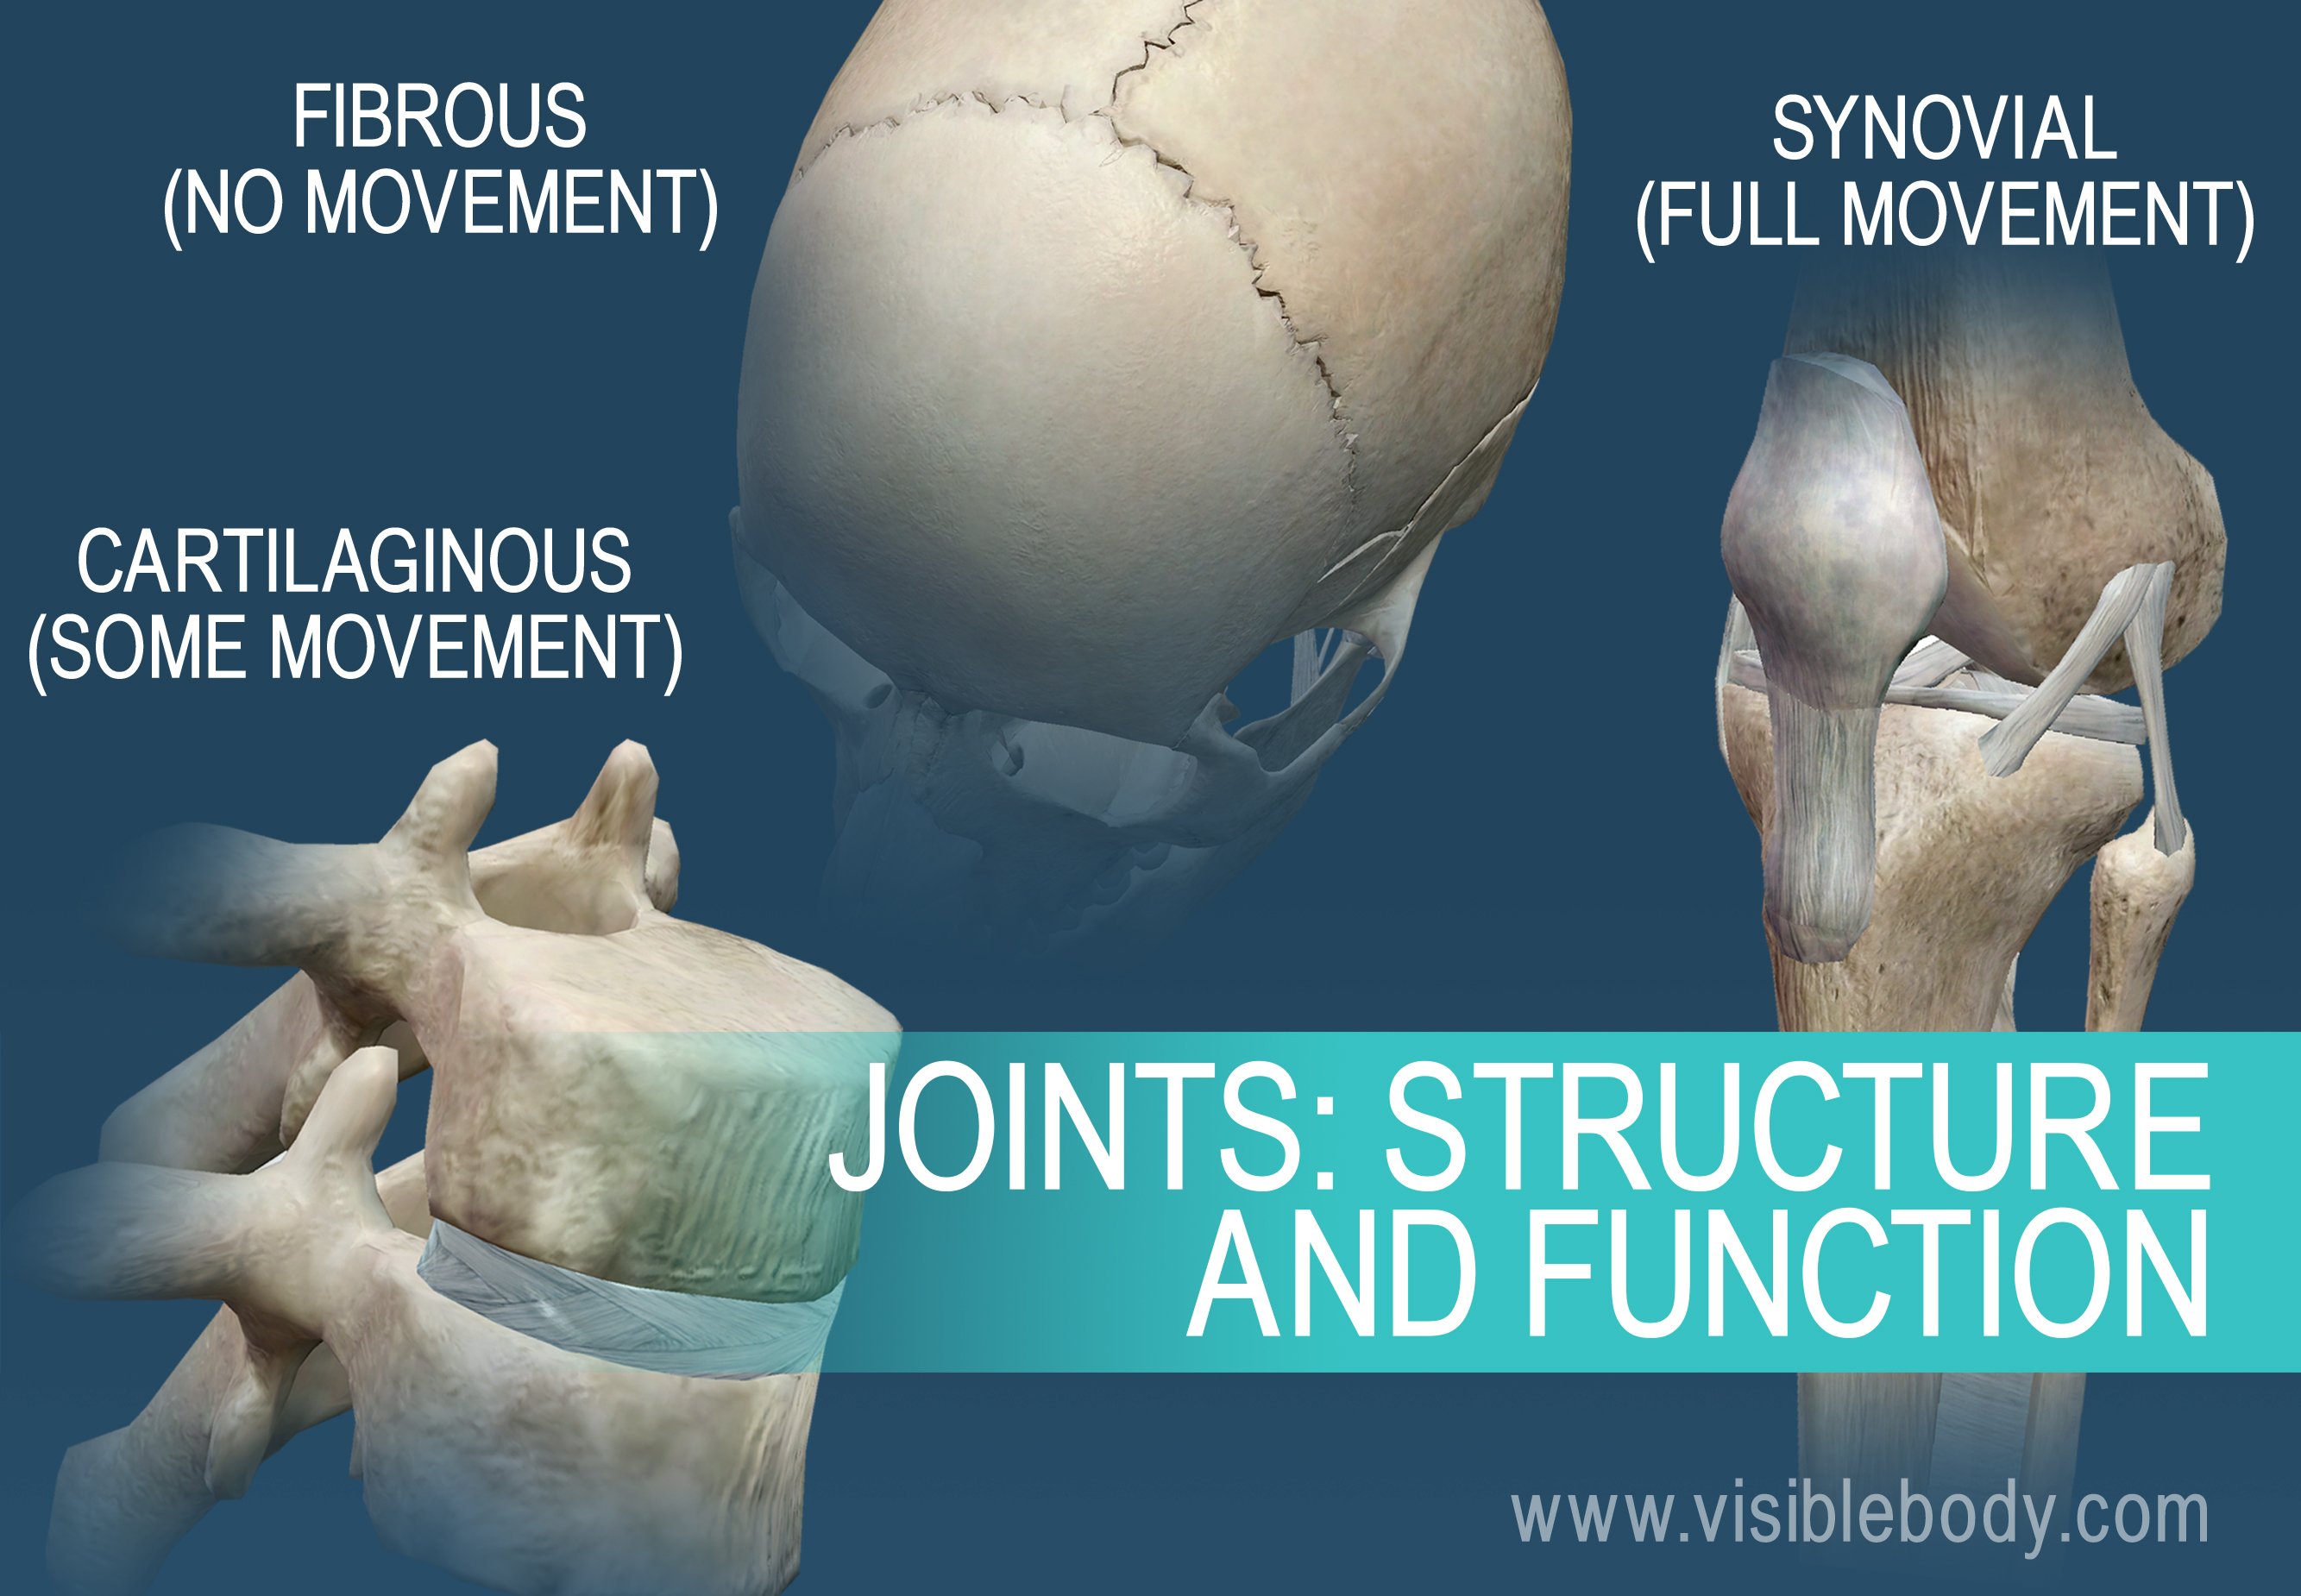 Joints can be named for their motion type, or their composition